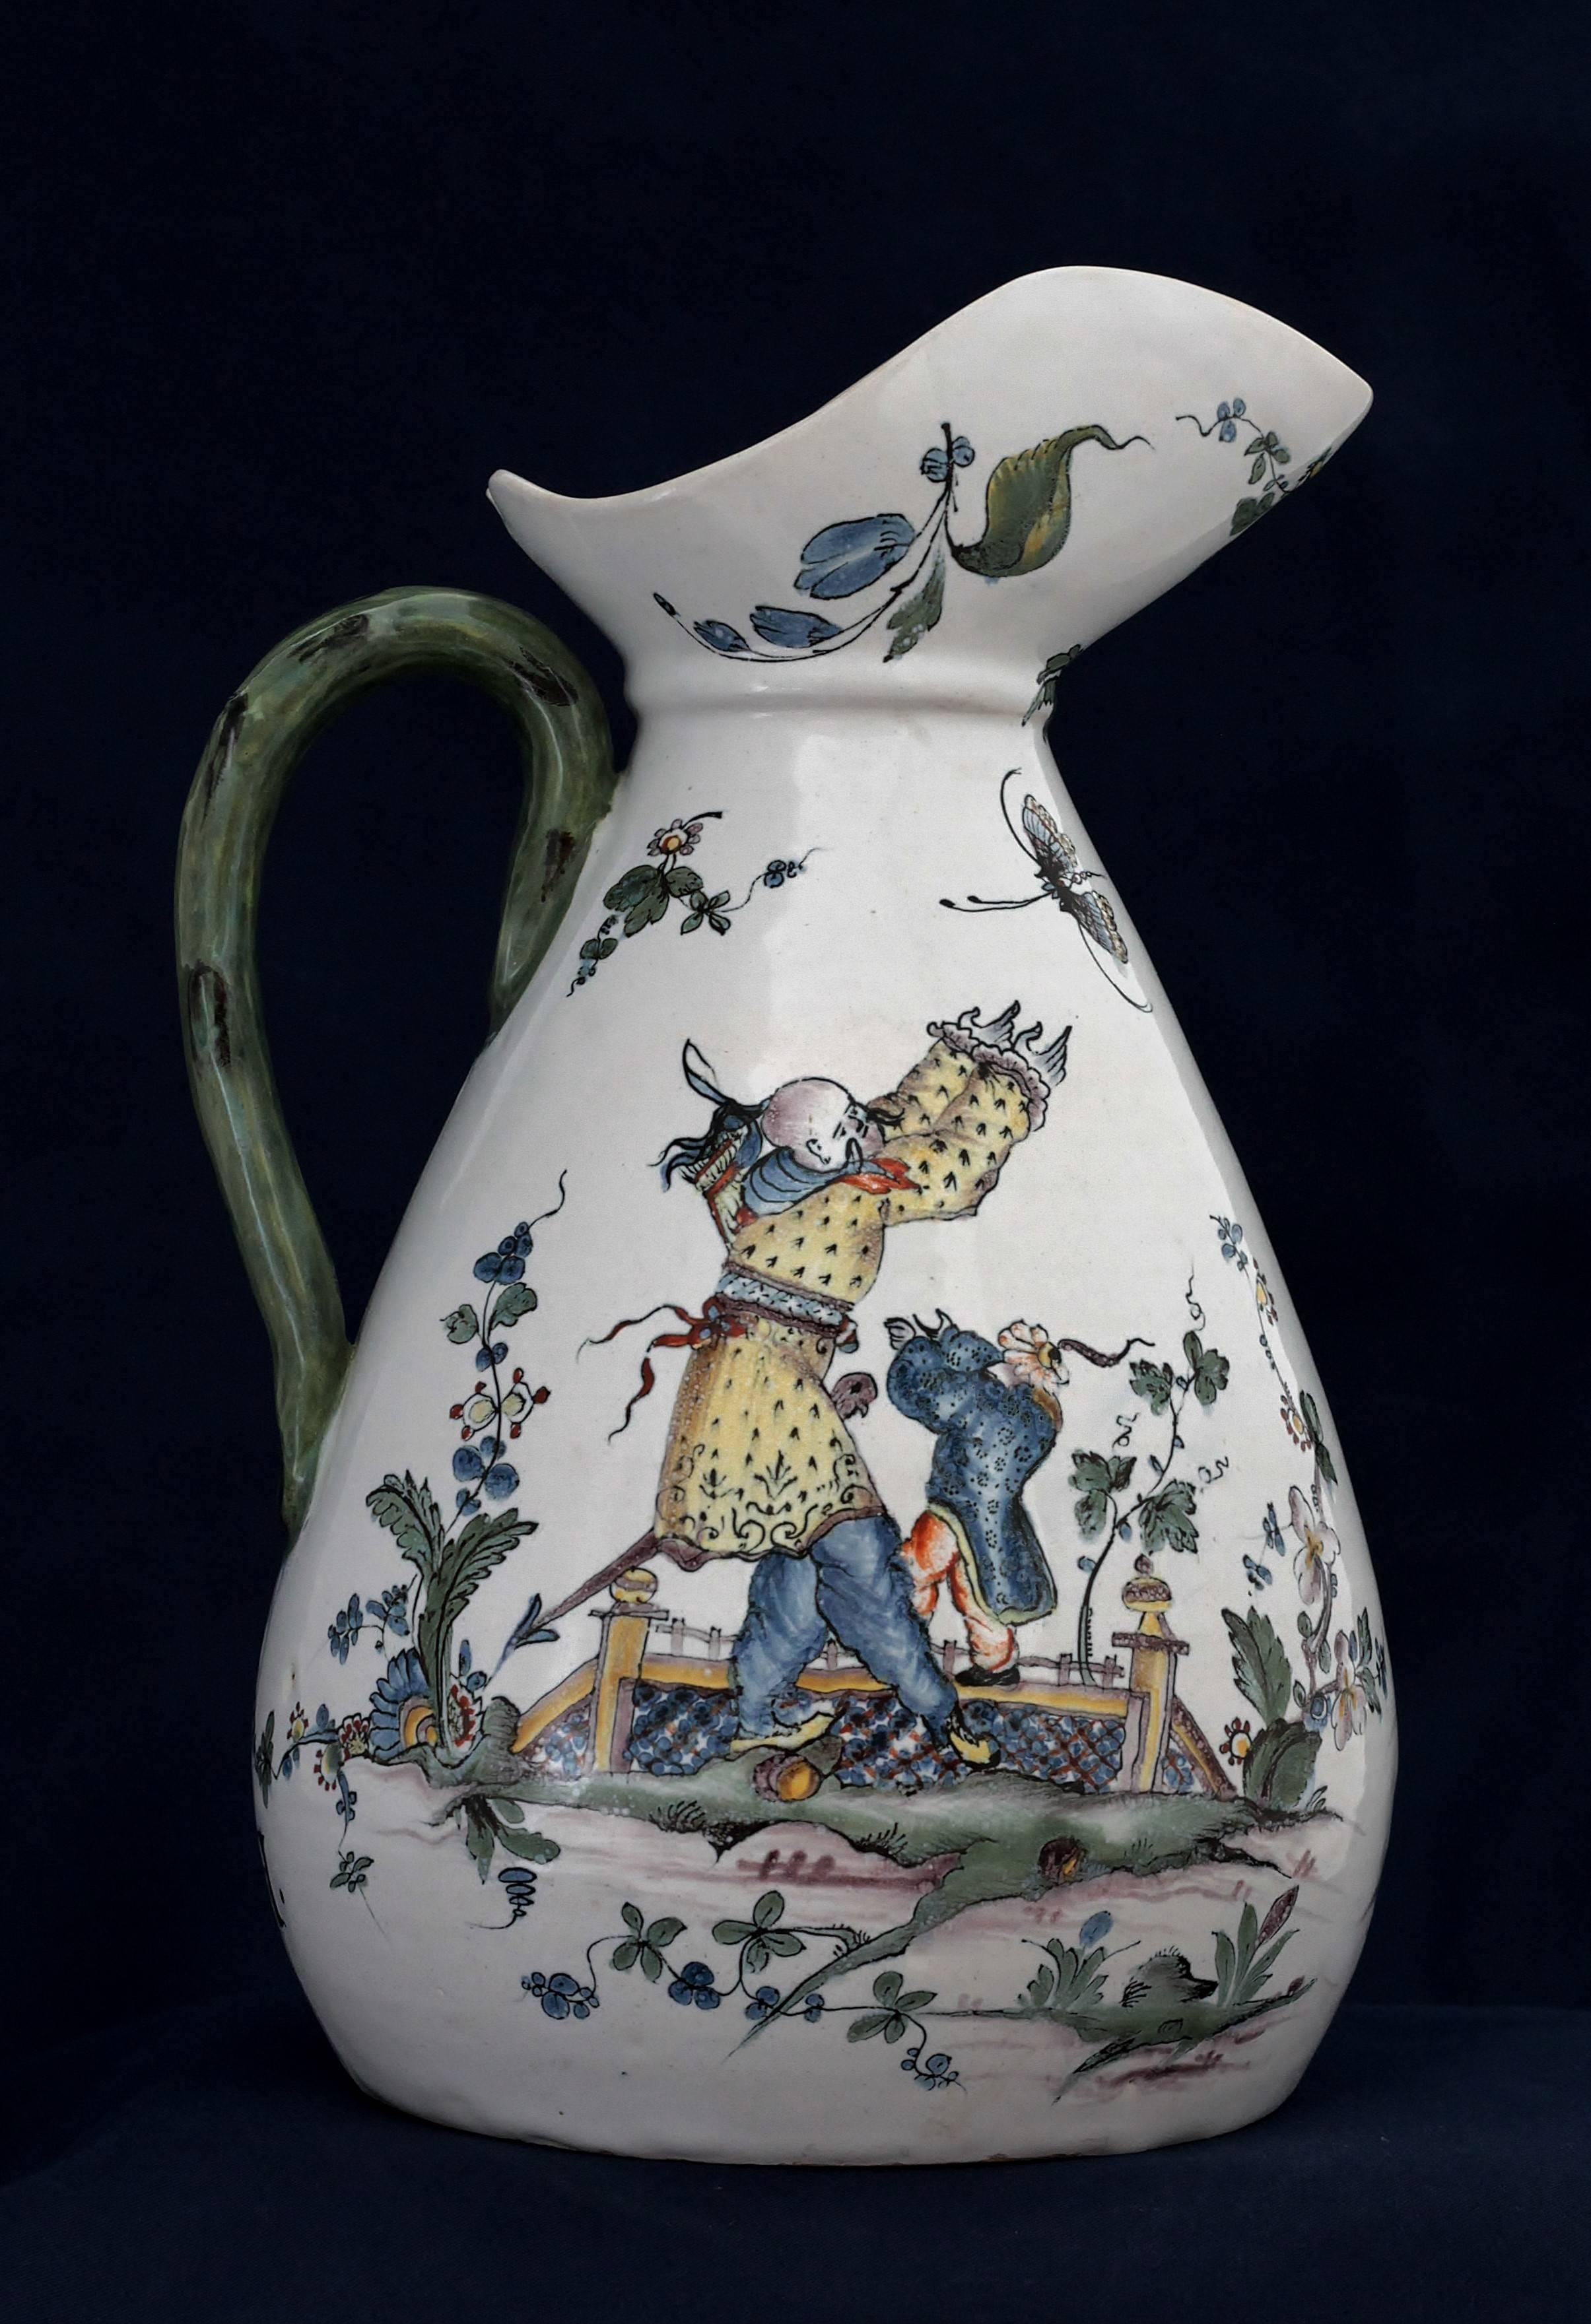 A faïence cider jug with polychrome decoration of Chinese men, landscape with pagoda, flowers and foliages. Inscriptions under the handle “1767” and “CH”.
Arnhem (Netherlands), 18th century.
Measures: Height 28 cm, diameter 18.5 cm
Handle has